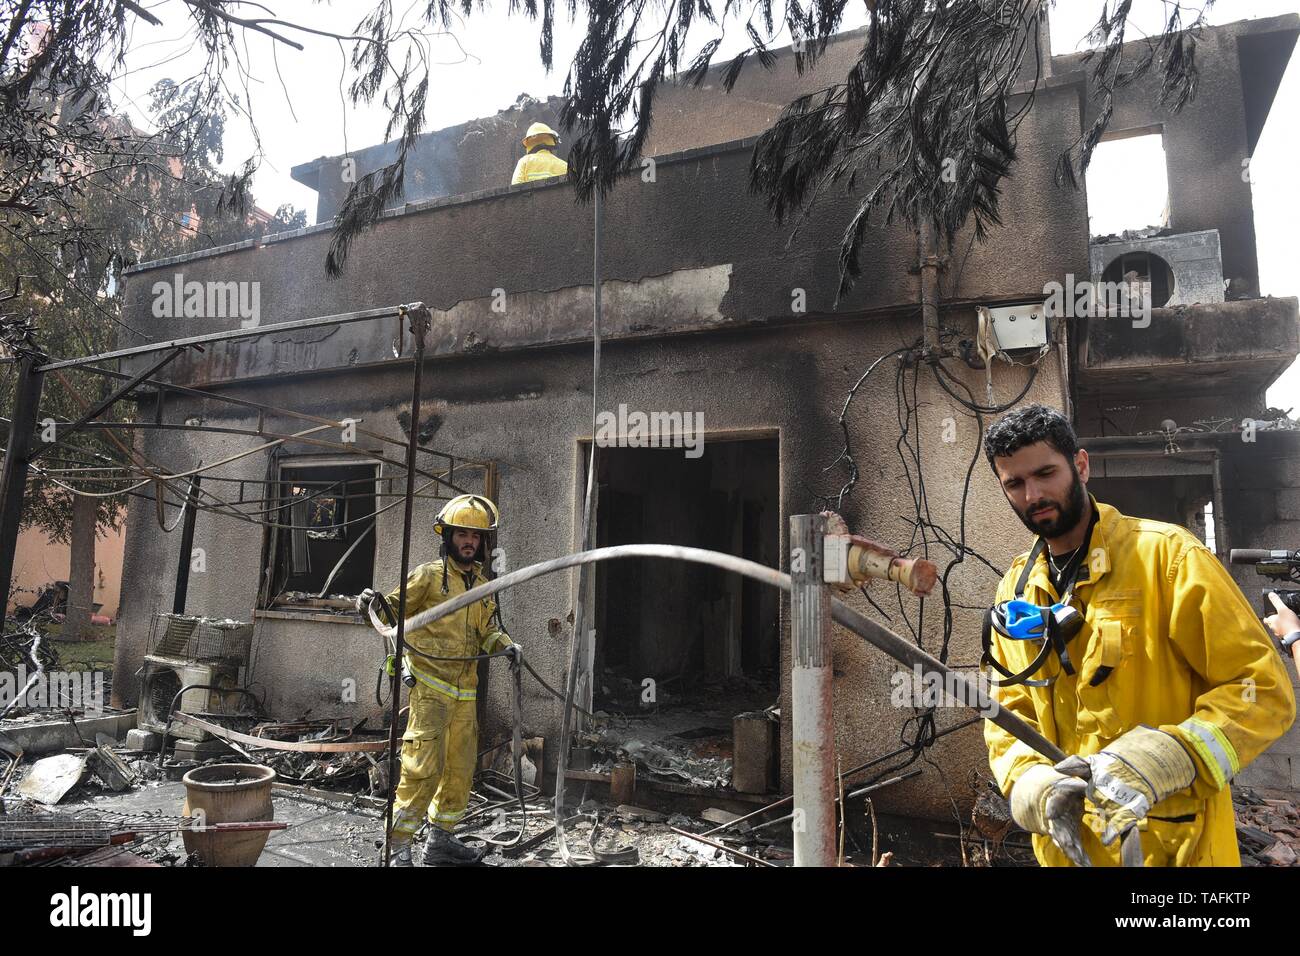 Mevo Modi'im, Israel. 24th May, 2019. Firefighters check loss and damage following a fire in the village of Mevo Modi'im, Israel, May 24, 2019. The Israeli government requested international aid to fight dozens of huge fires that broke out on May 23 because of extreme hot weather. Credit: JINI/Xinhua/Alamy Live News Stock Photo